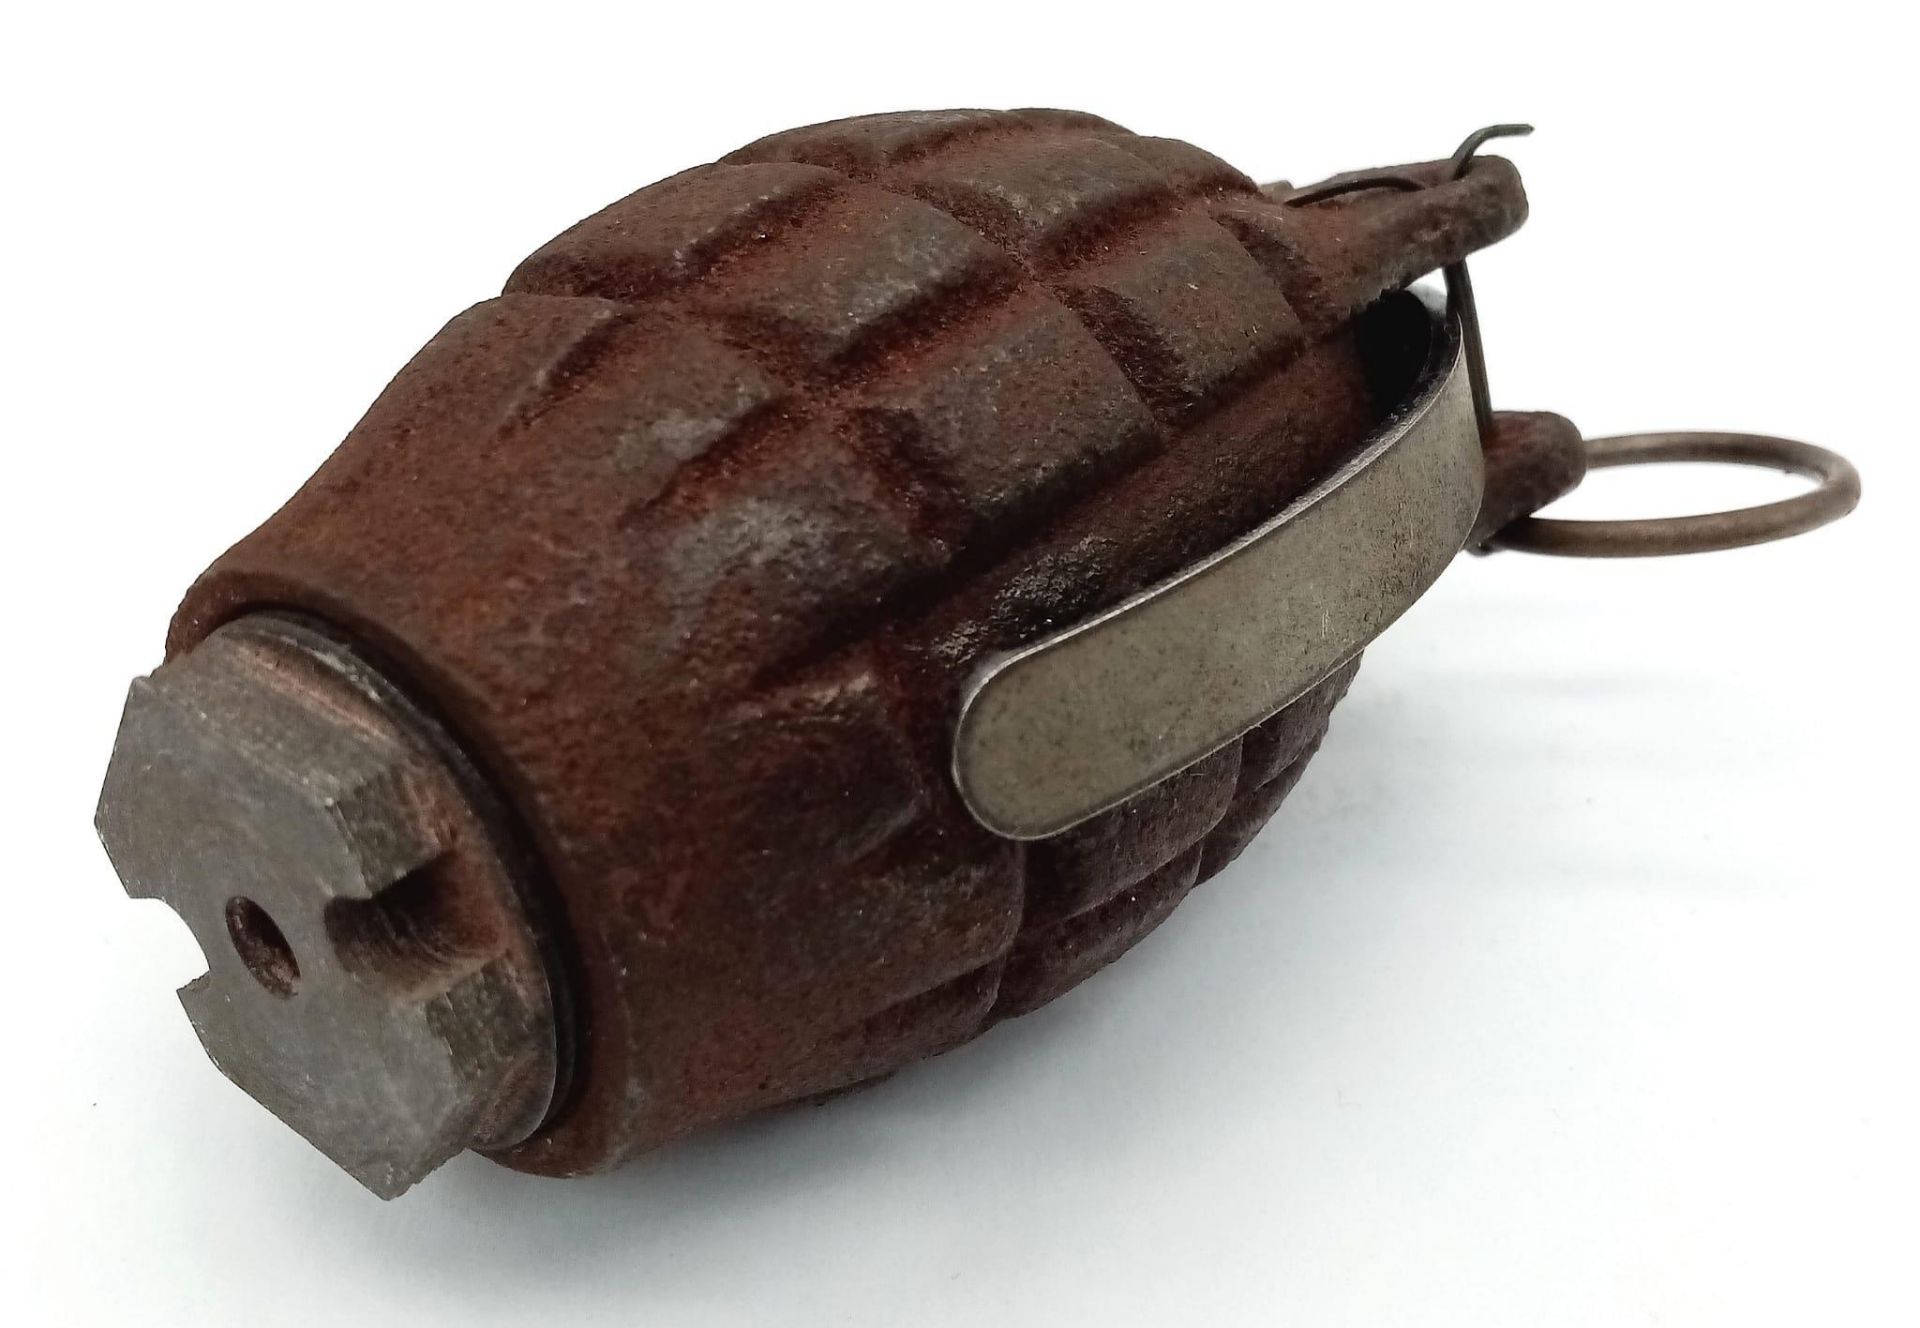 INERT Israeli No 36 Hand Grenade circa late 1940’a-erly 1950’s. UK Mainland Sales Only. - Image 2 of 7